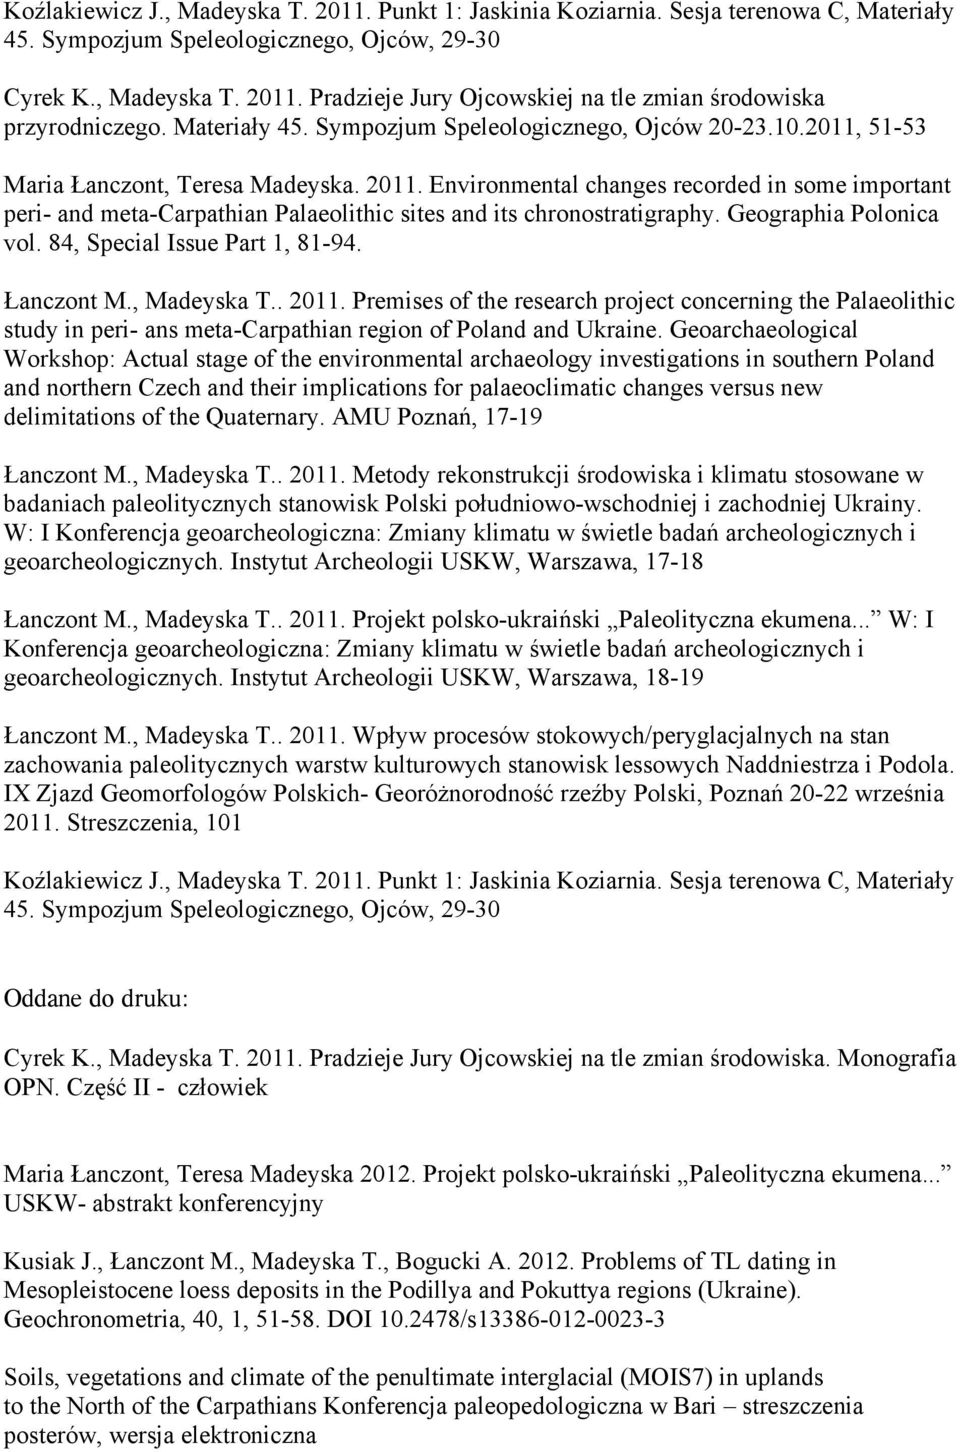 Environmental changes recorded in some important peri- and meta-carpathian Palaeolithic sites and its chronostratigraphy. Geographia Polonica vol. 84, Special Issue Part 1, 81-94. Łanczont M.